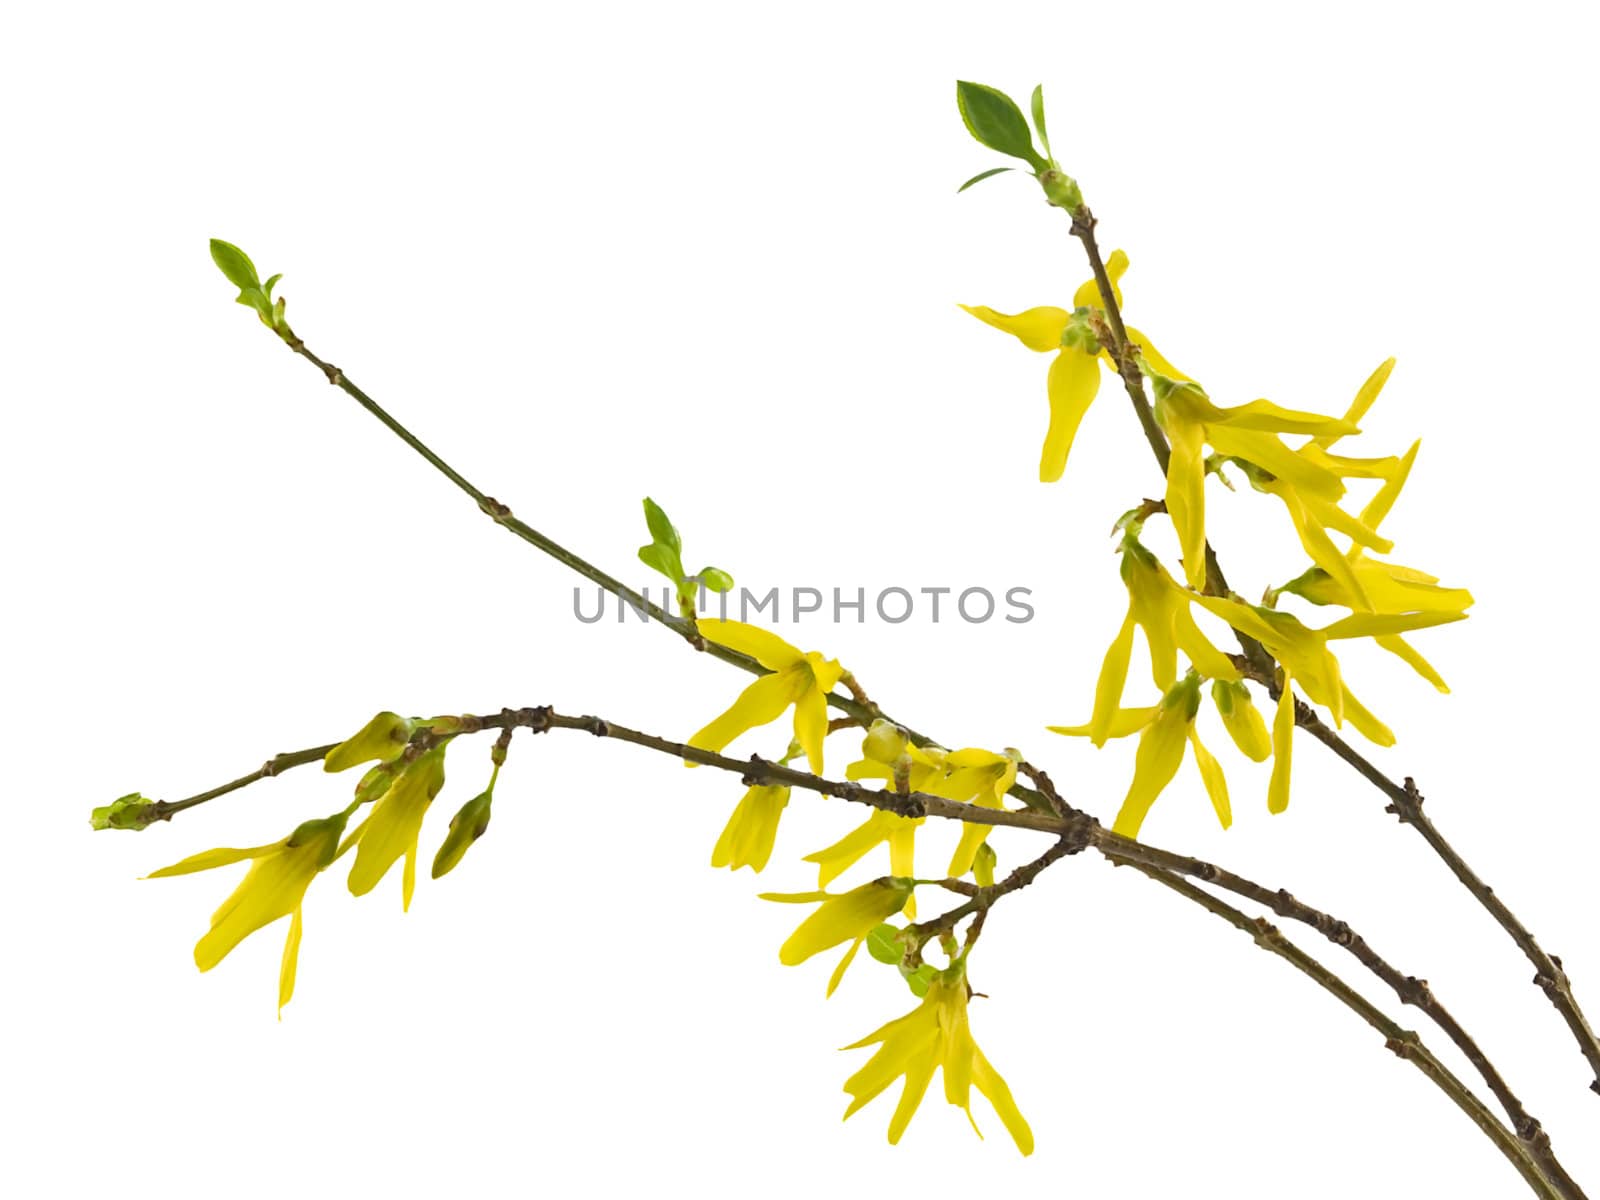 Spring forsythia branch with buds on white background

